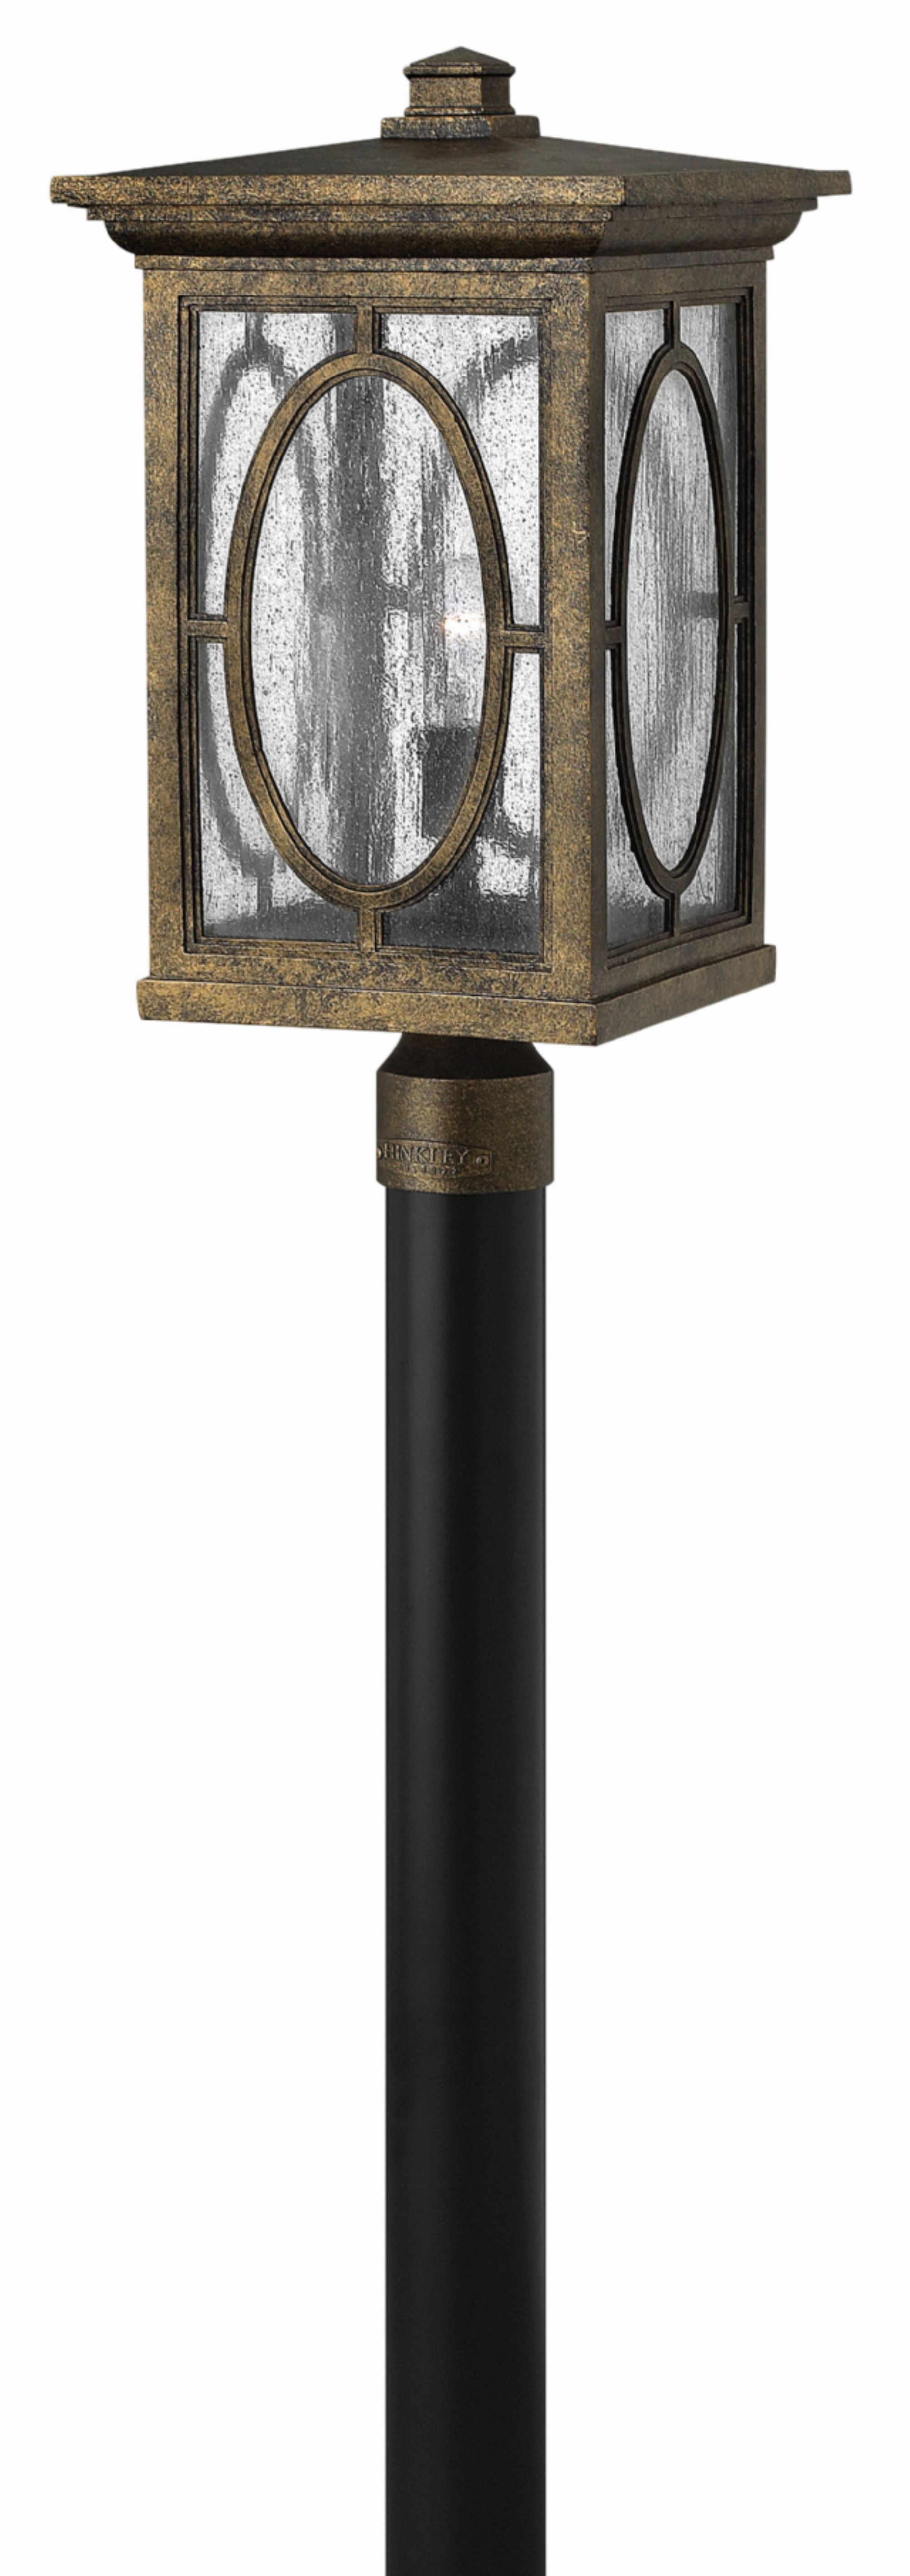 Hinkley Lighting 1499-GU24 1 Light Post Light from the Randolph Collection - image 2 of 2